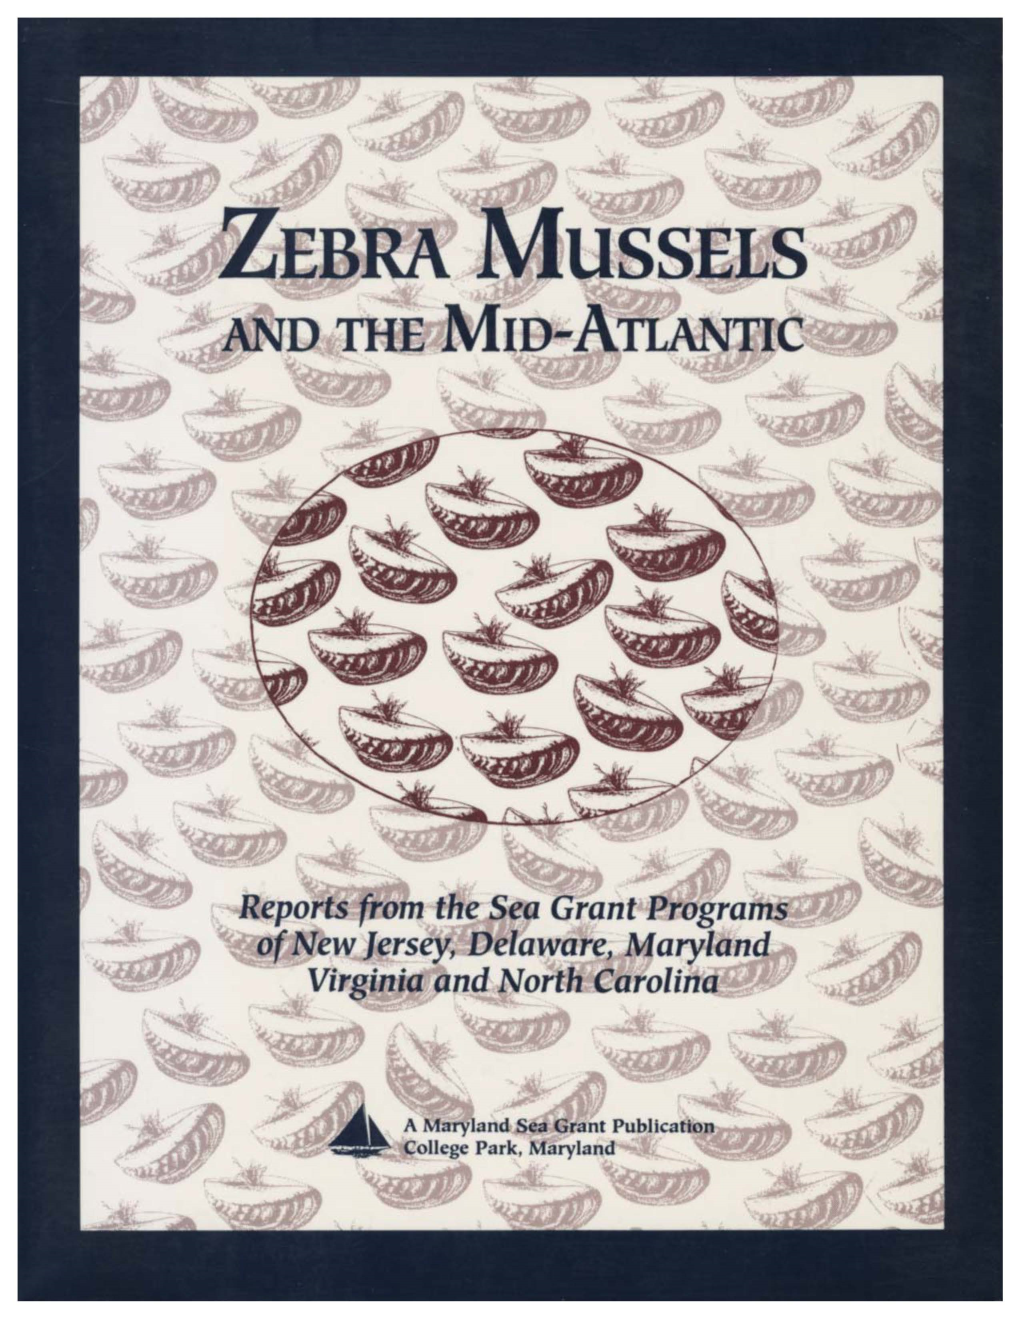 ZEBRA Mussels and the MID-ATLANTIC